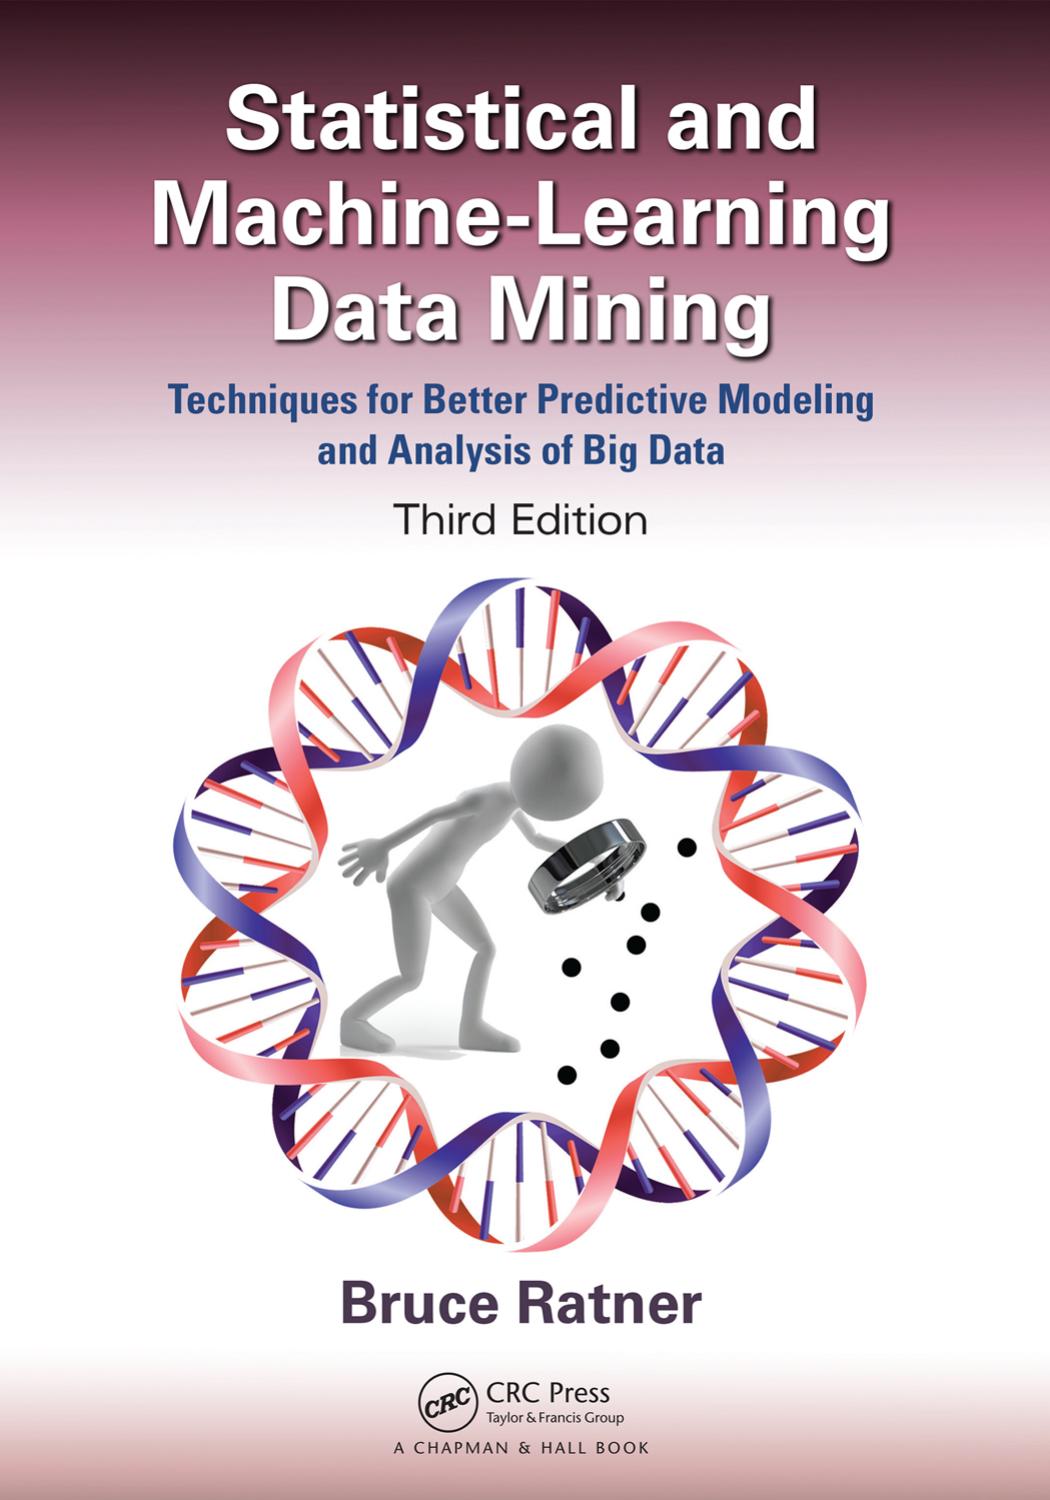 Statistical and Machine-Learning Data Mining, Third Edition  Techniques for Better Predictive Modeling and Analysis of 3rd ed 2017